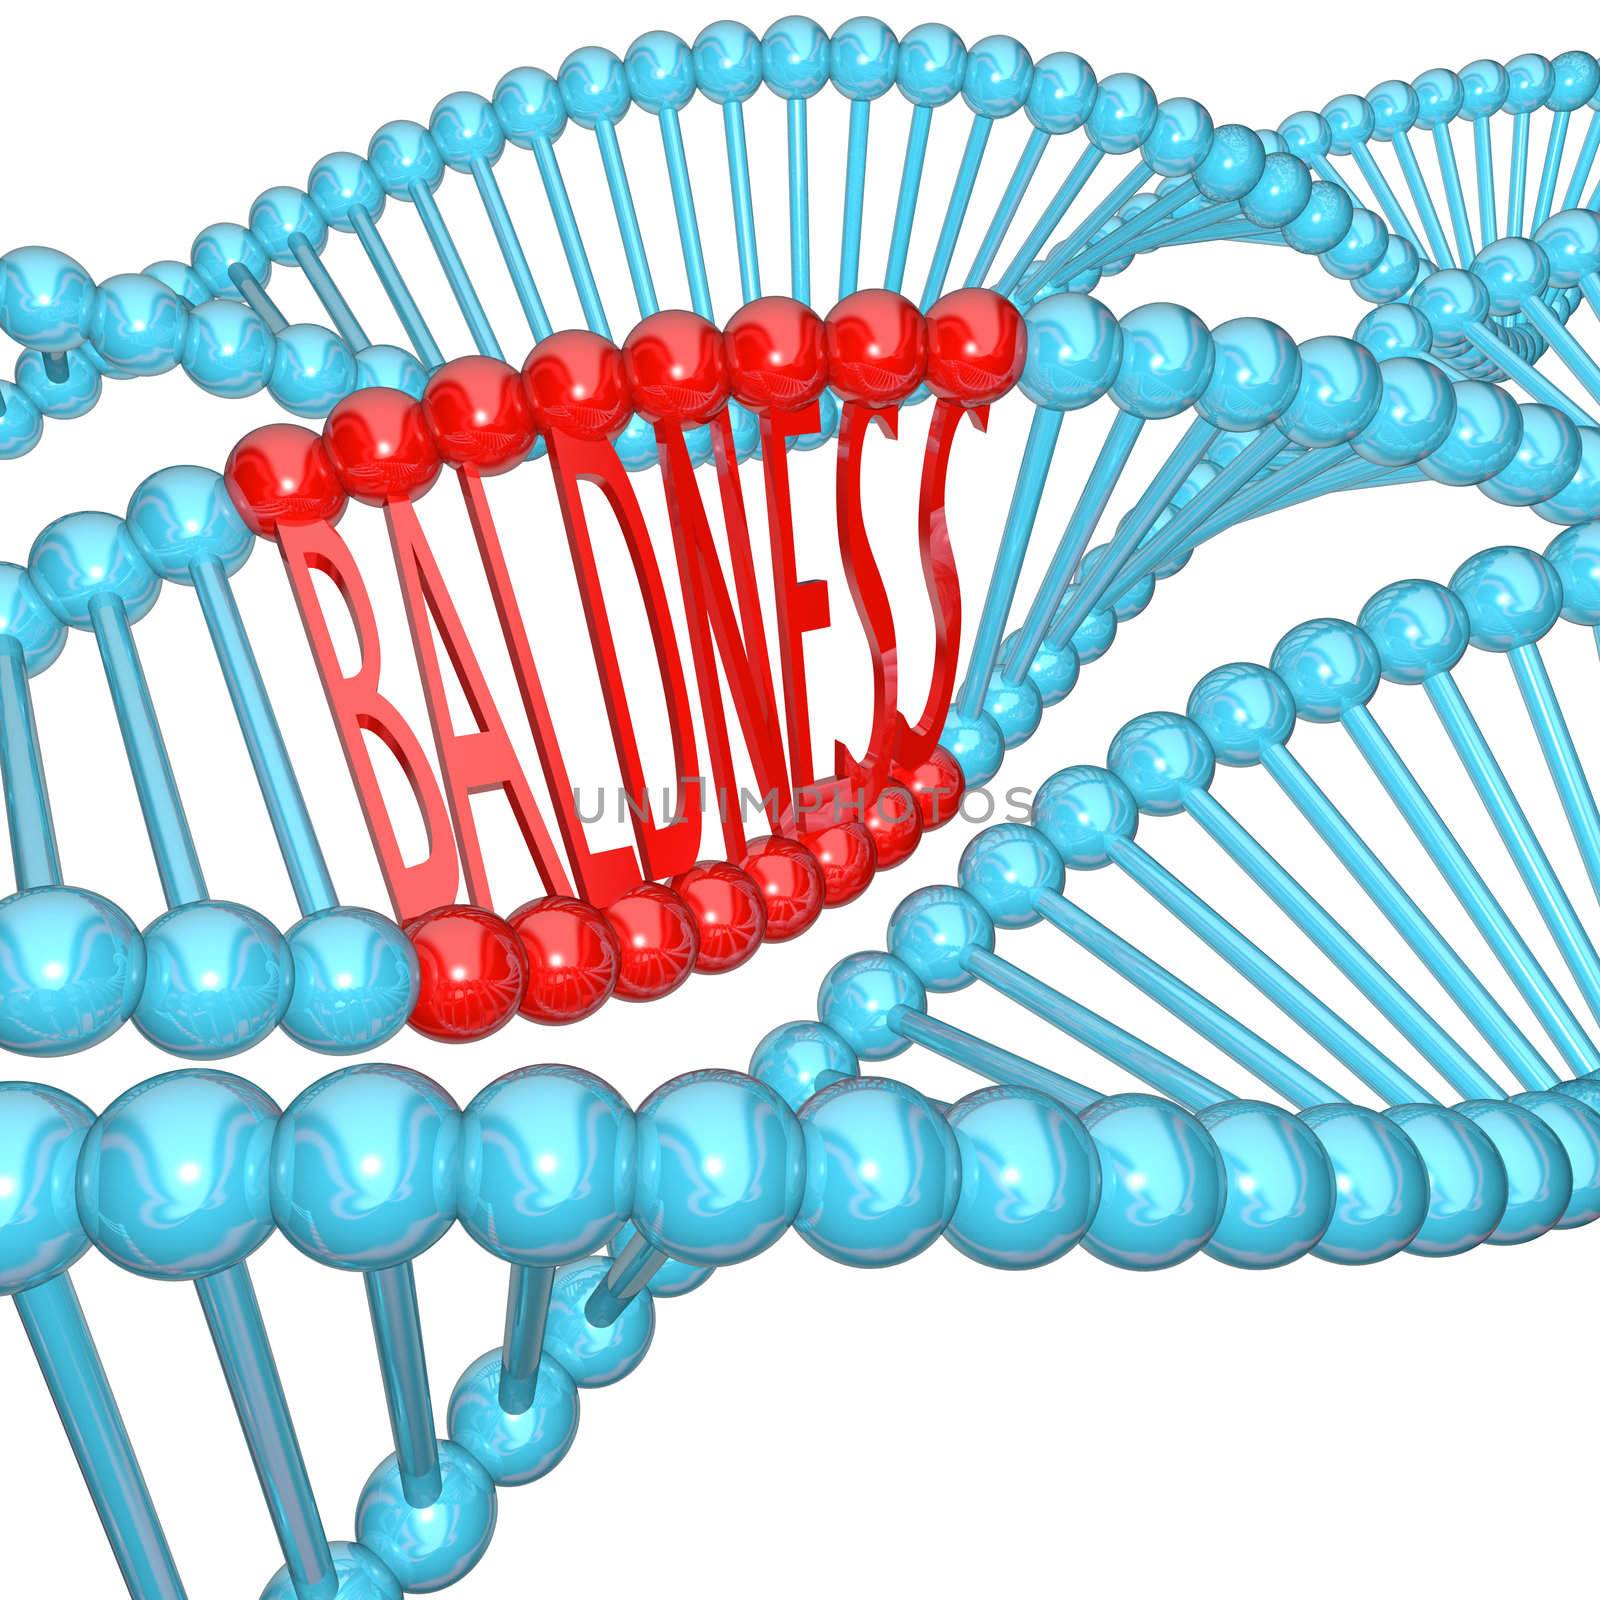 The word Baldness hidden in strands of DNA, representing the cause of balding in your genes -- it's hereditary!